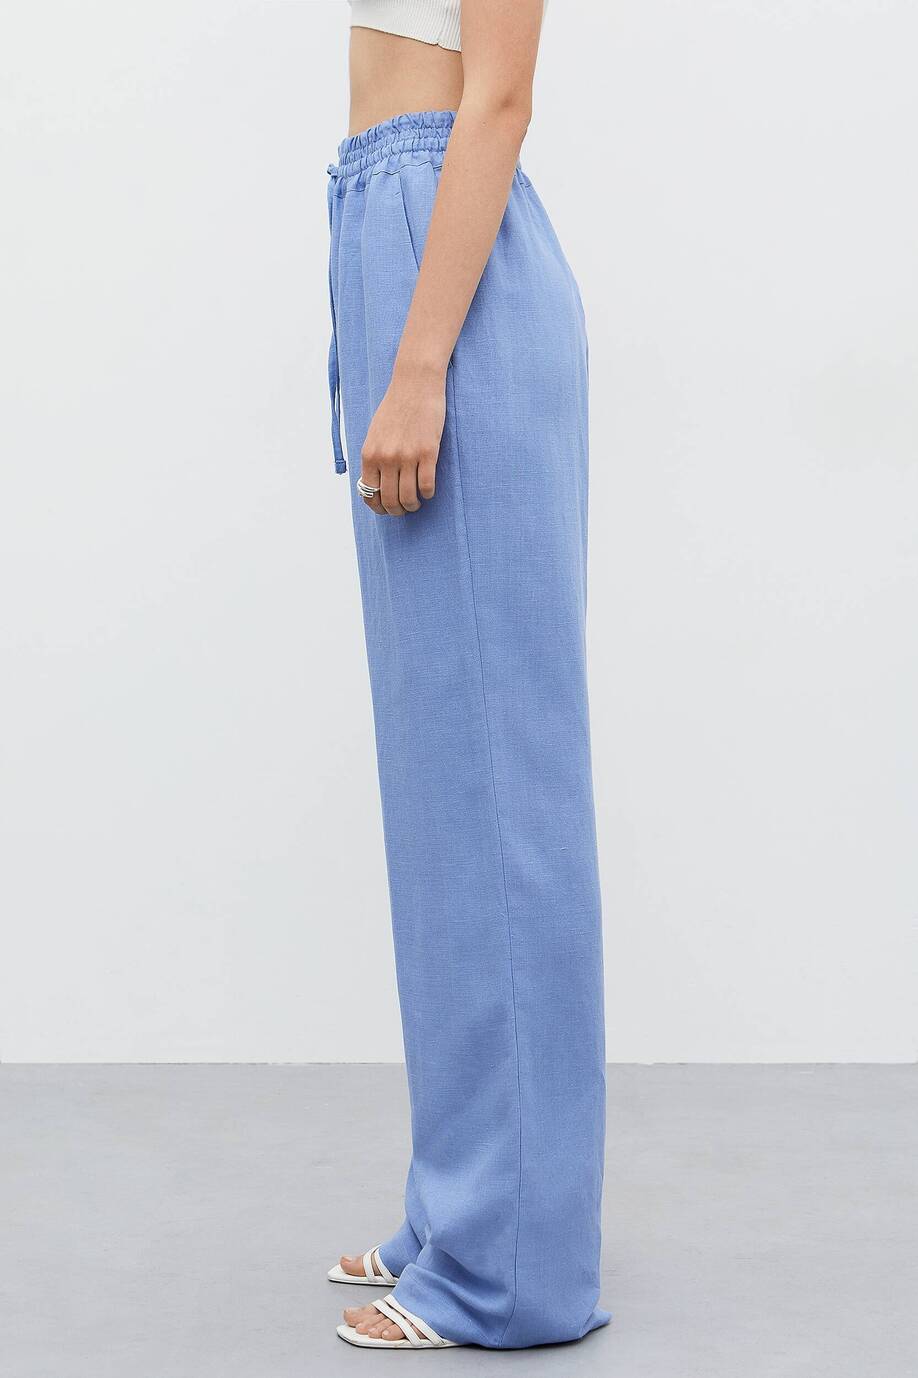 Loose-fitting trousers made of linen